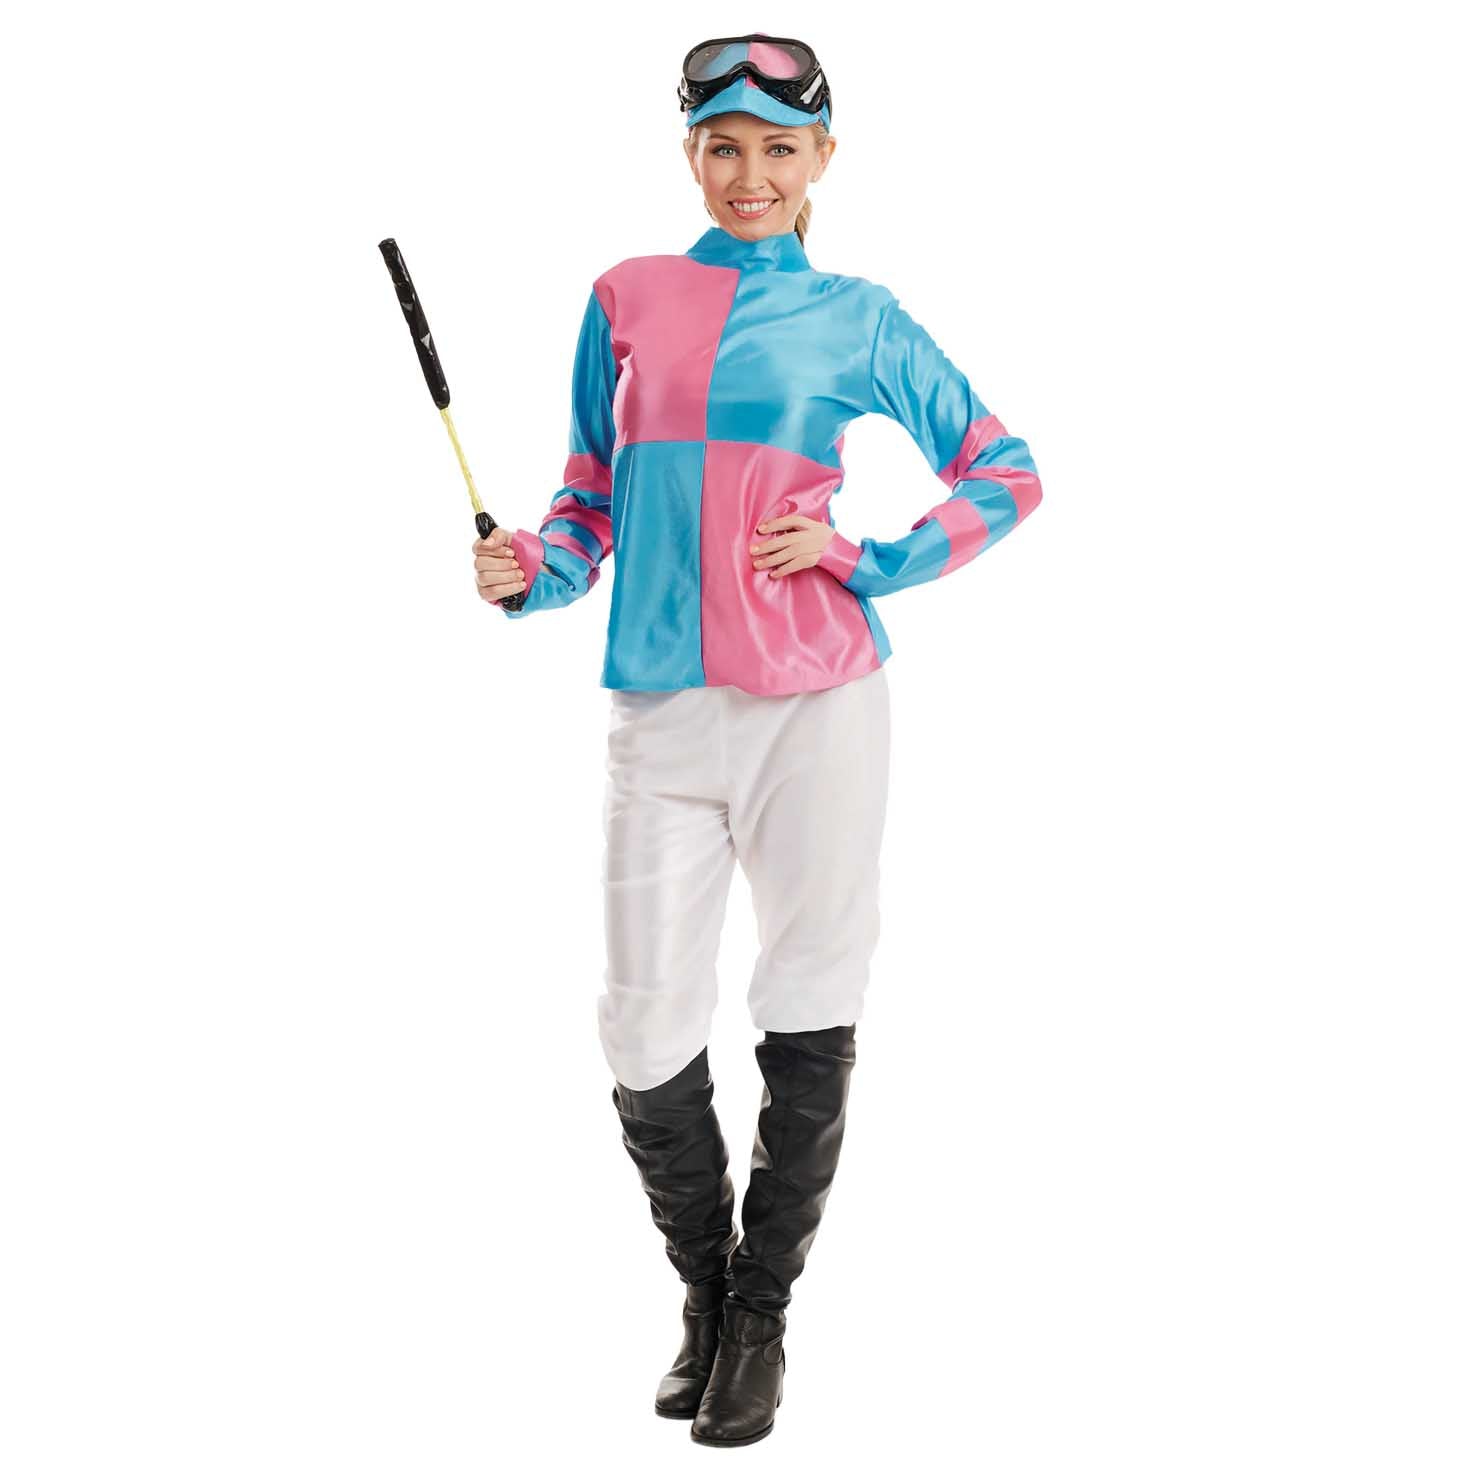 Pink and blue jockey outfit for women